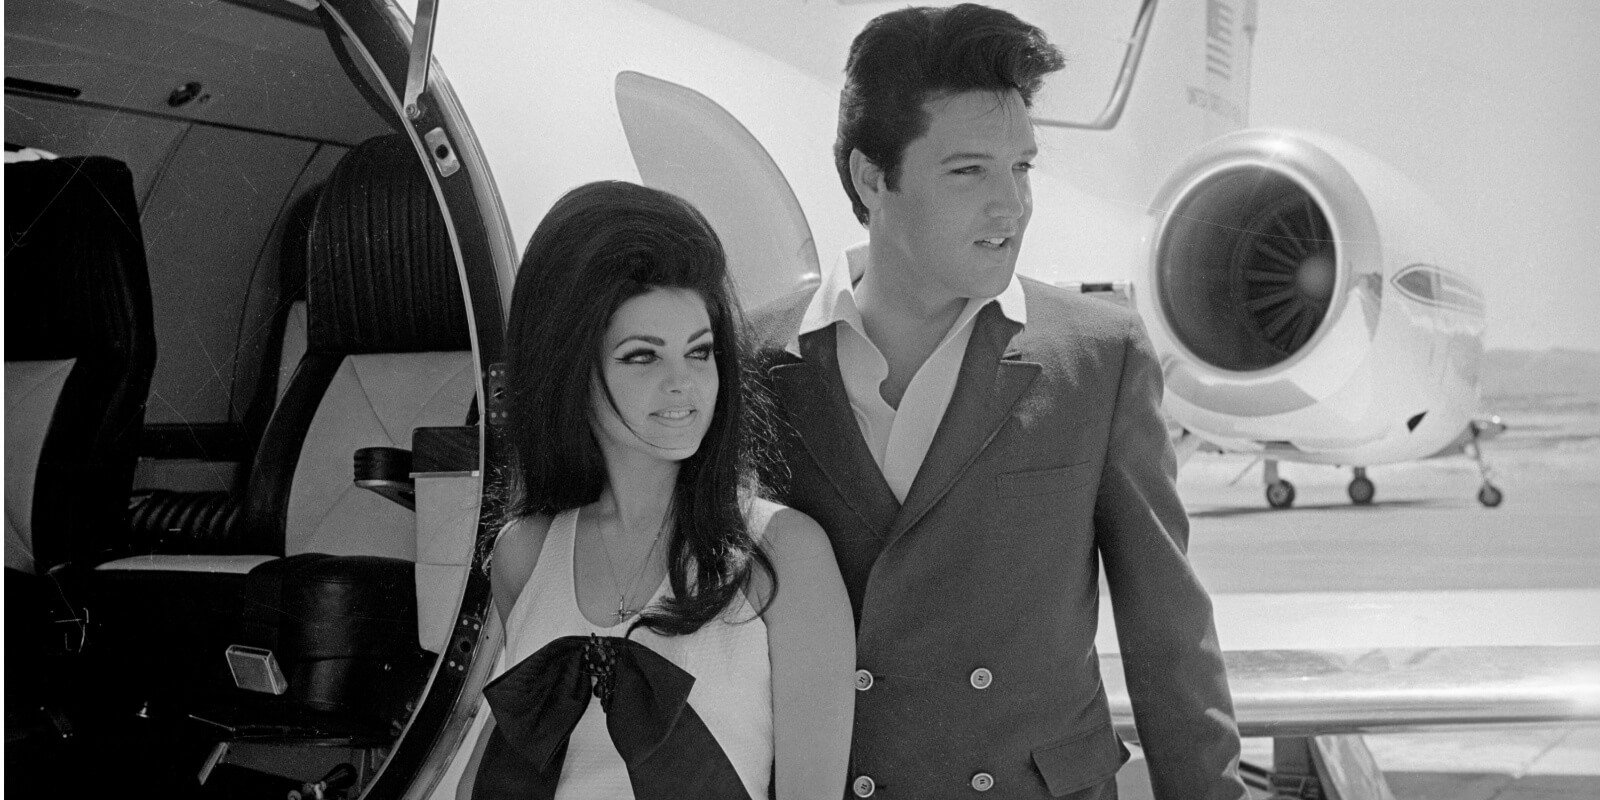 Priscilla and Elvis Presley photographed following their wedding in 1967.